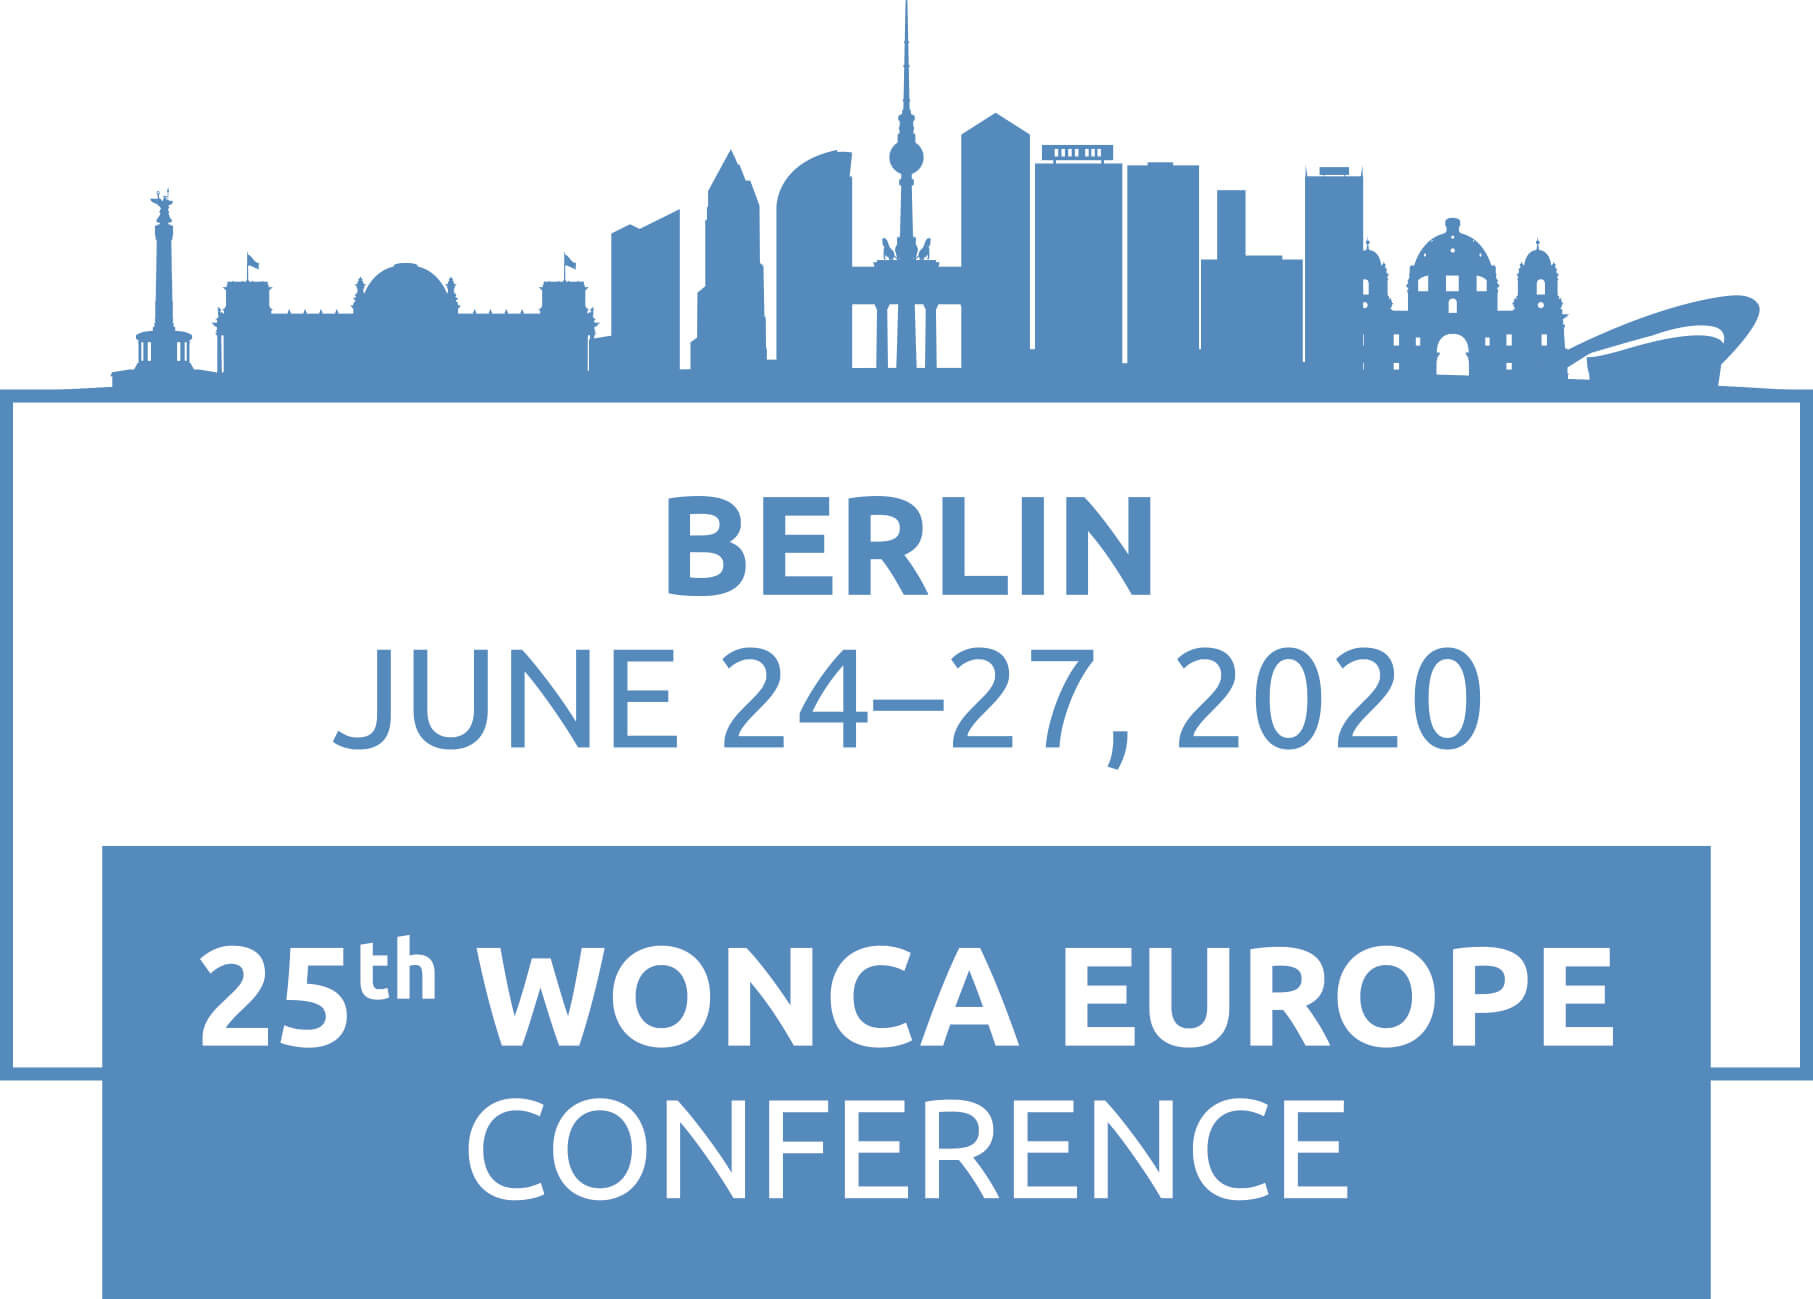 WONCA Europe Conference 2020